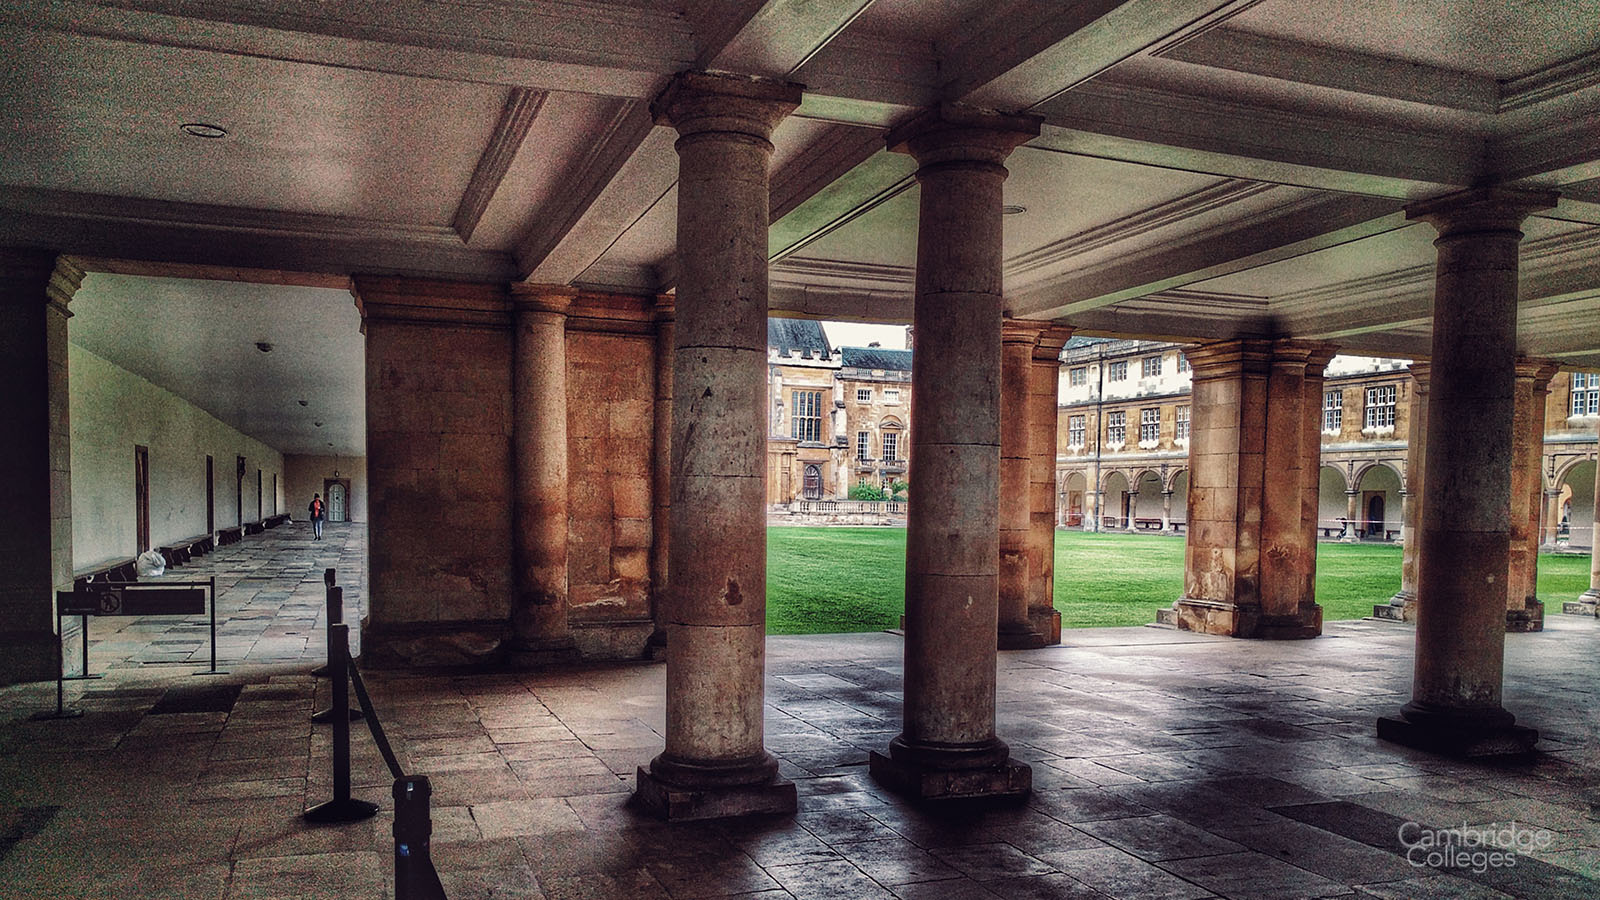 The Cloisters underneath the Wren library, looking towards Neville Court.